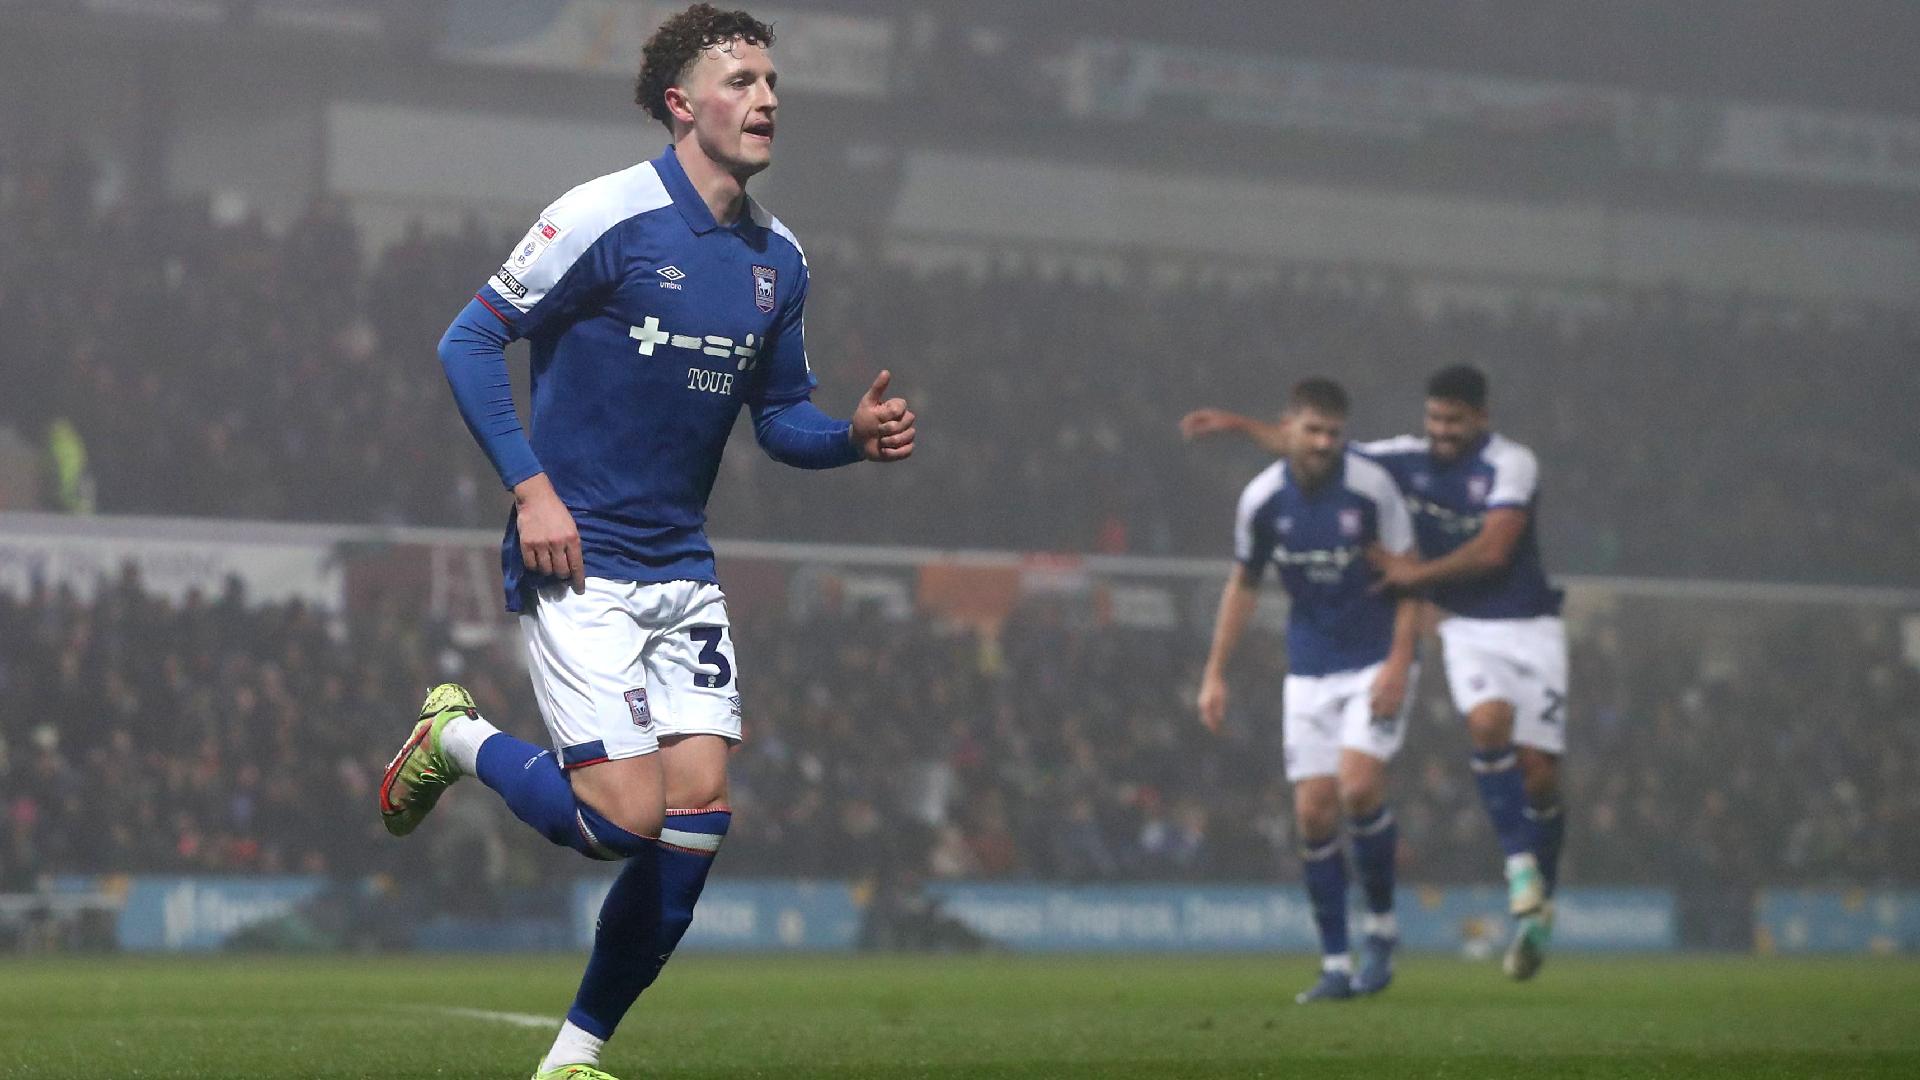 Ipswich return to winning ways by easing to victory over Millwall